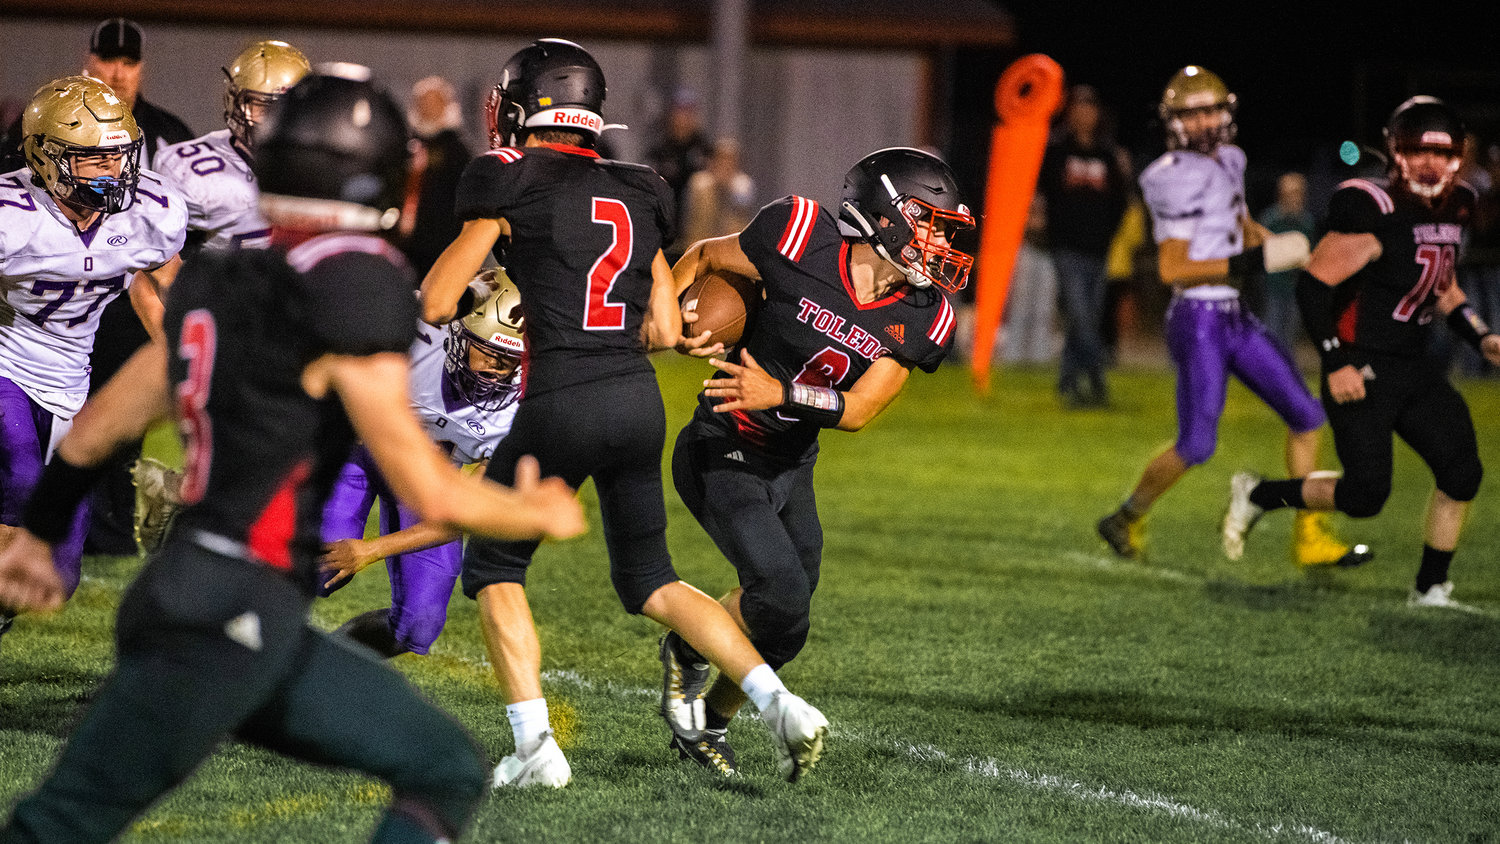 Riverhawks drive during a game against Onalaska Friday night.